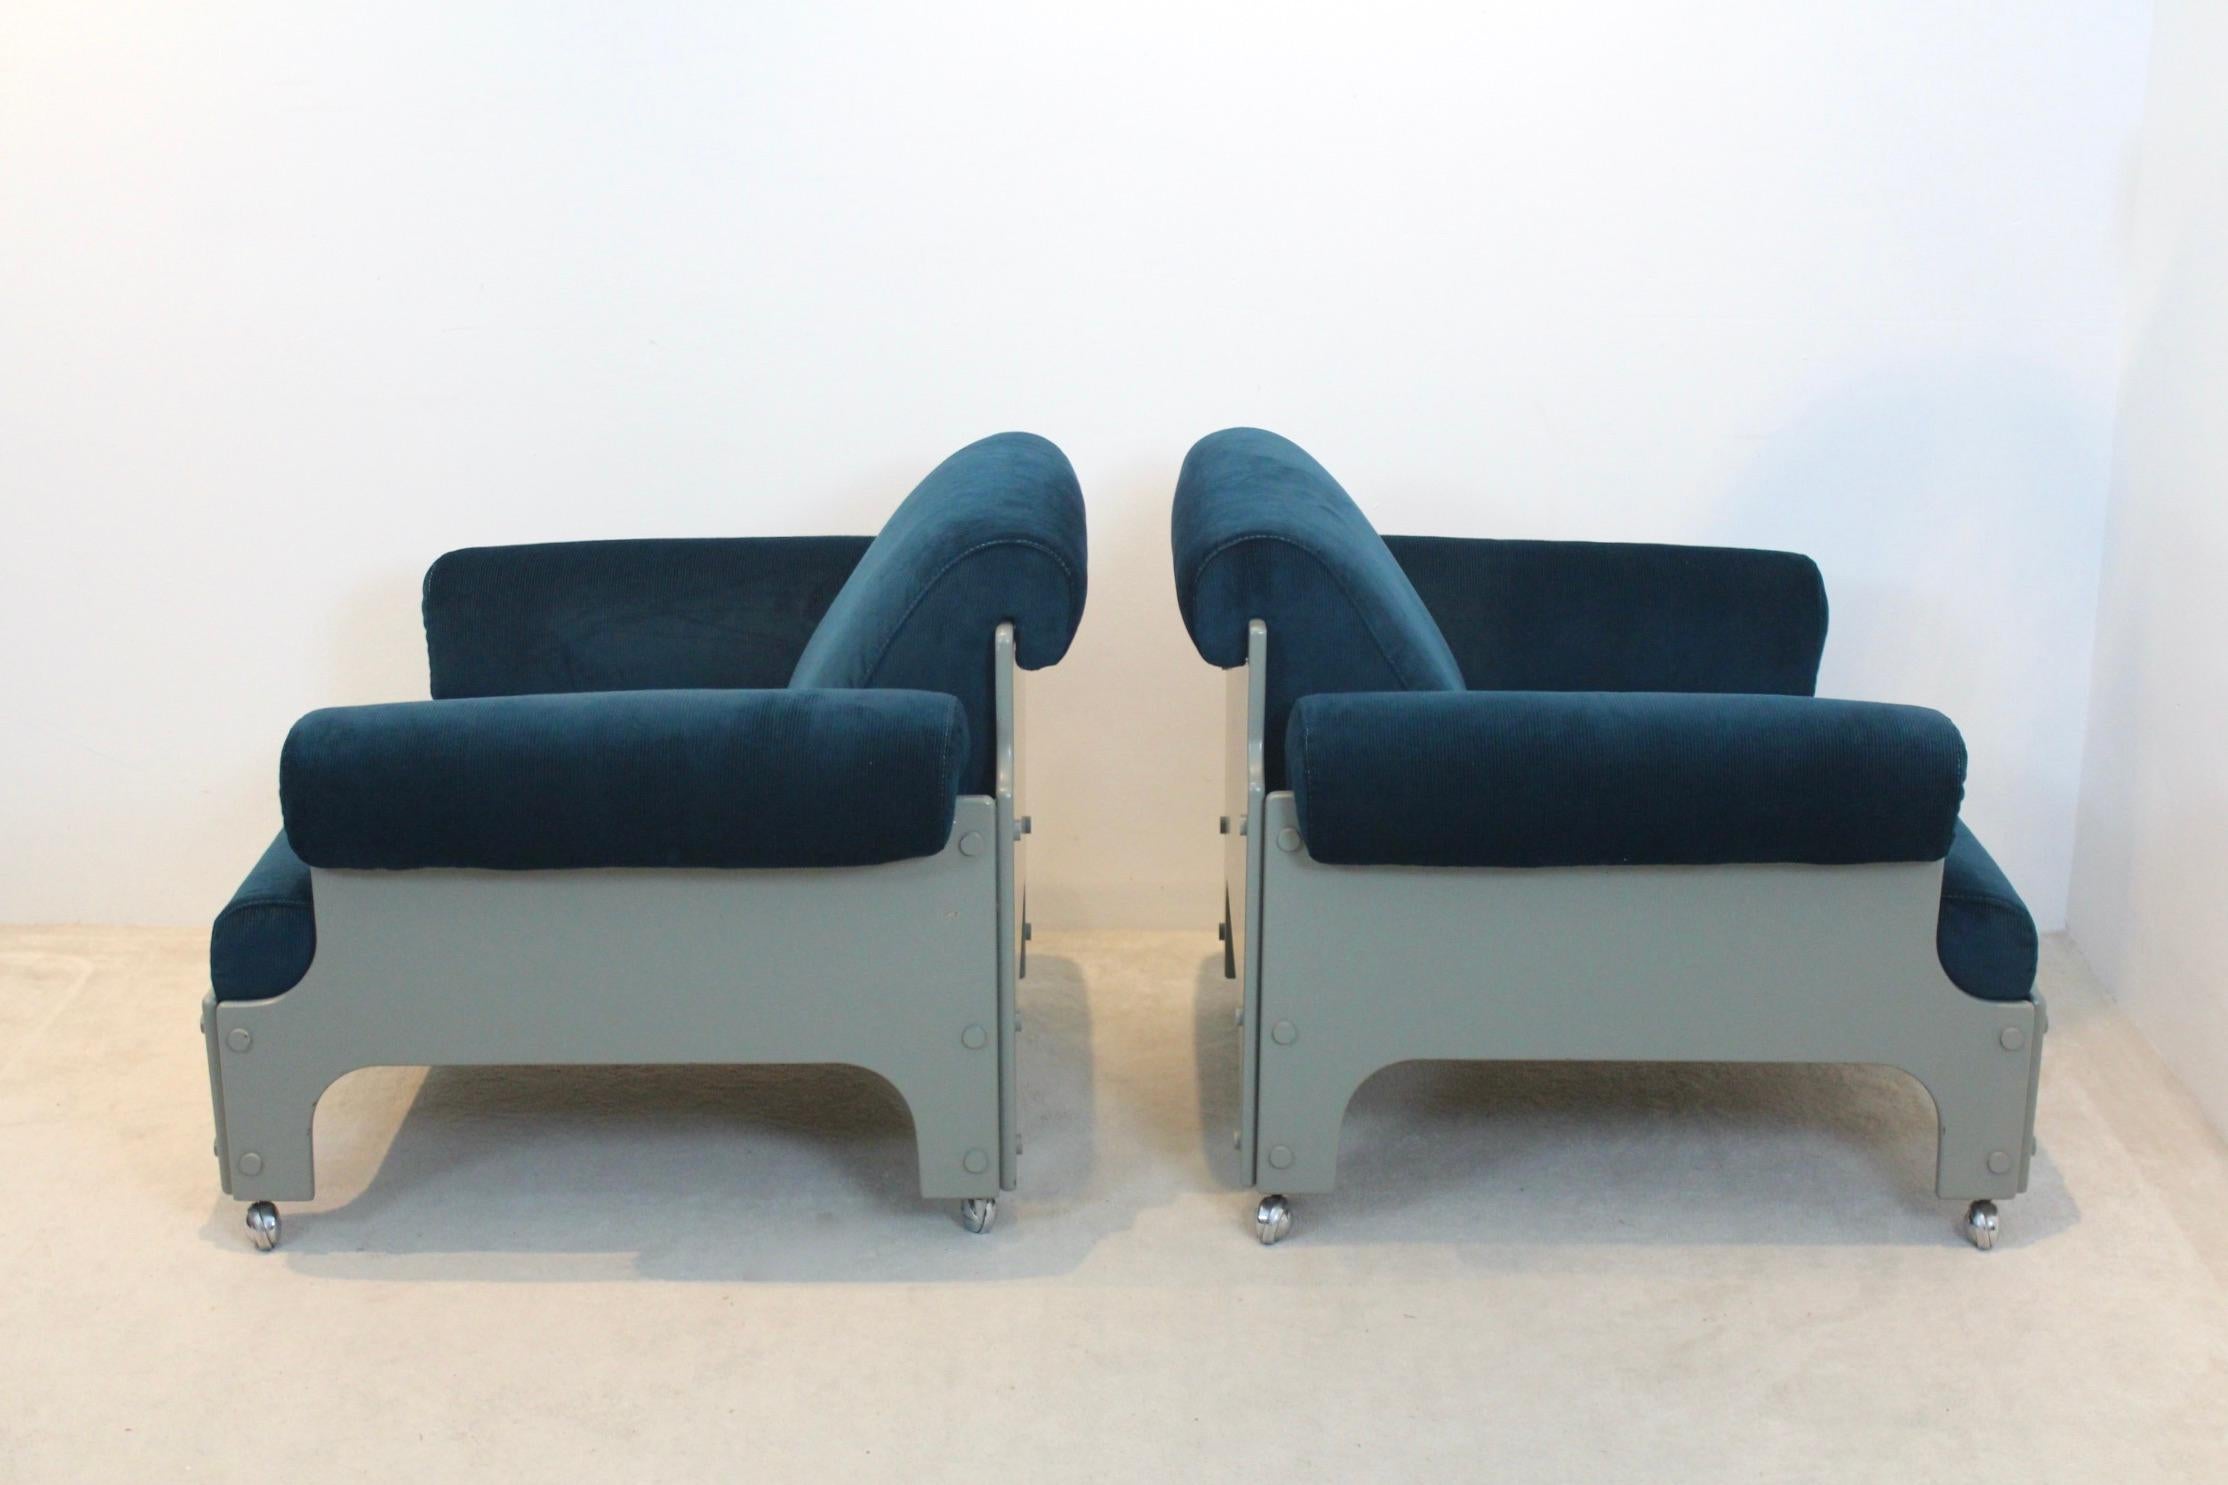 Very Rare SZ 85 Spectrum Easy Chairs by Jan Pieter Berghoef, 1968 For Sale 8